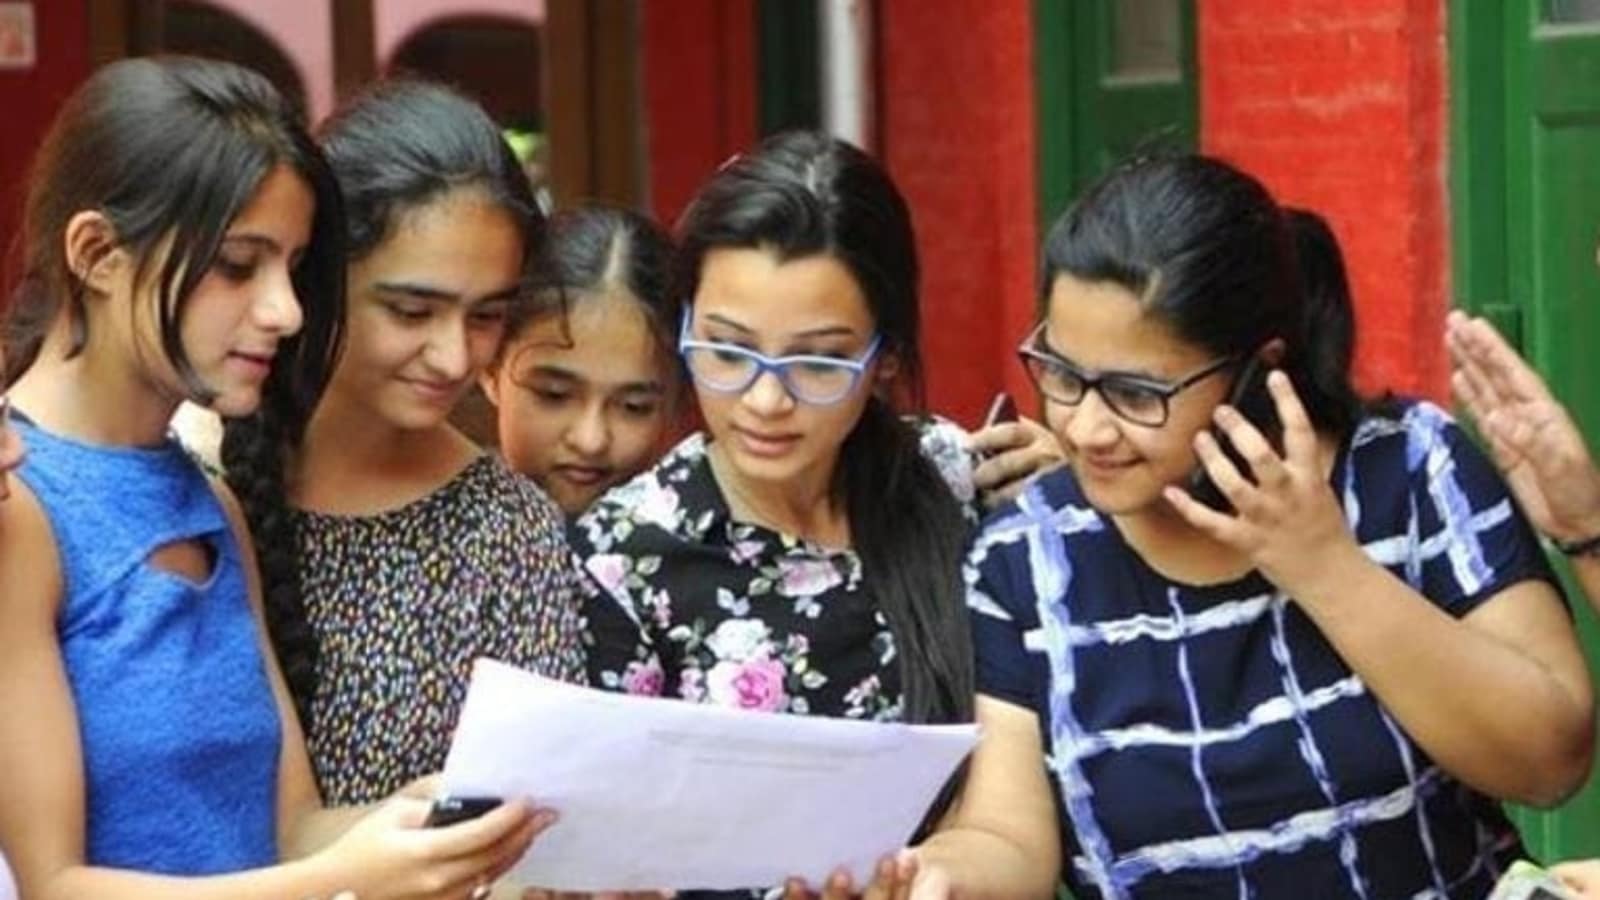 Maharashtra HSC result 2021 not today suggest reports, no official update yet